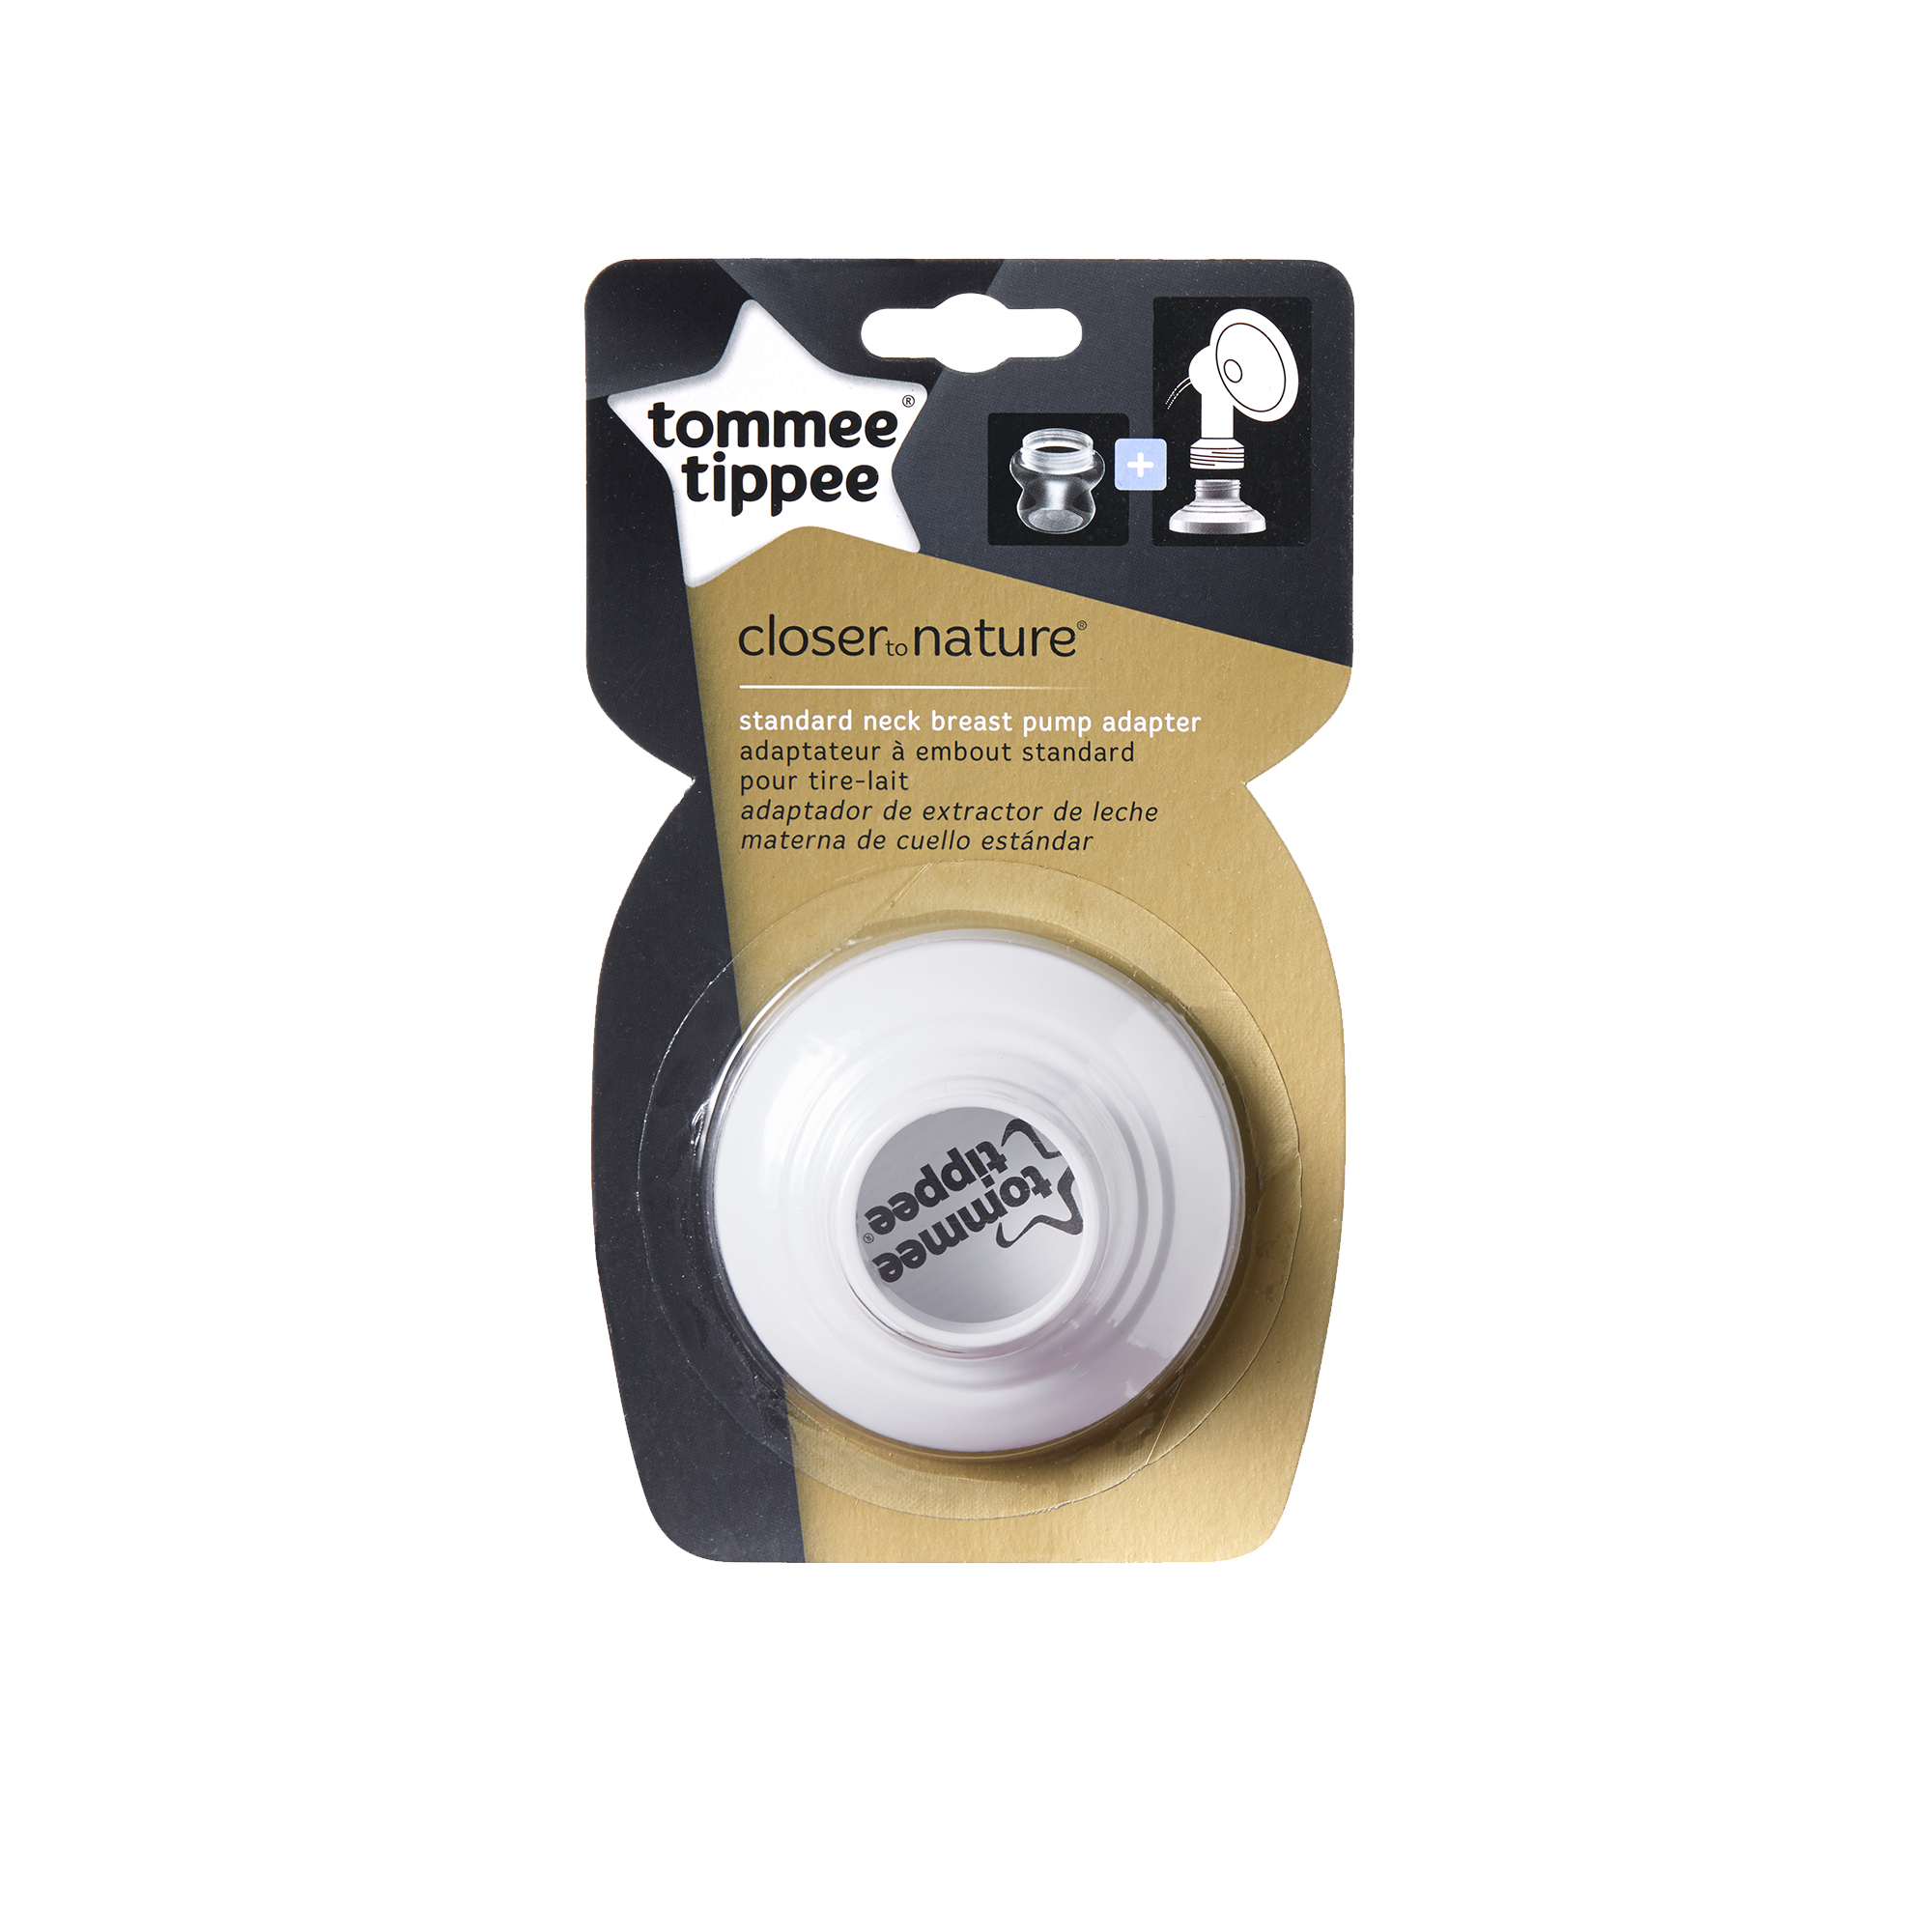 Tommee Tippee Closer to Nature Breast Pump and Bottle Adaptor - image 4 of 5